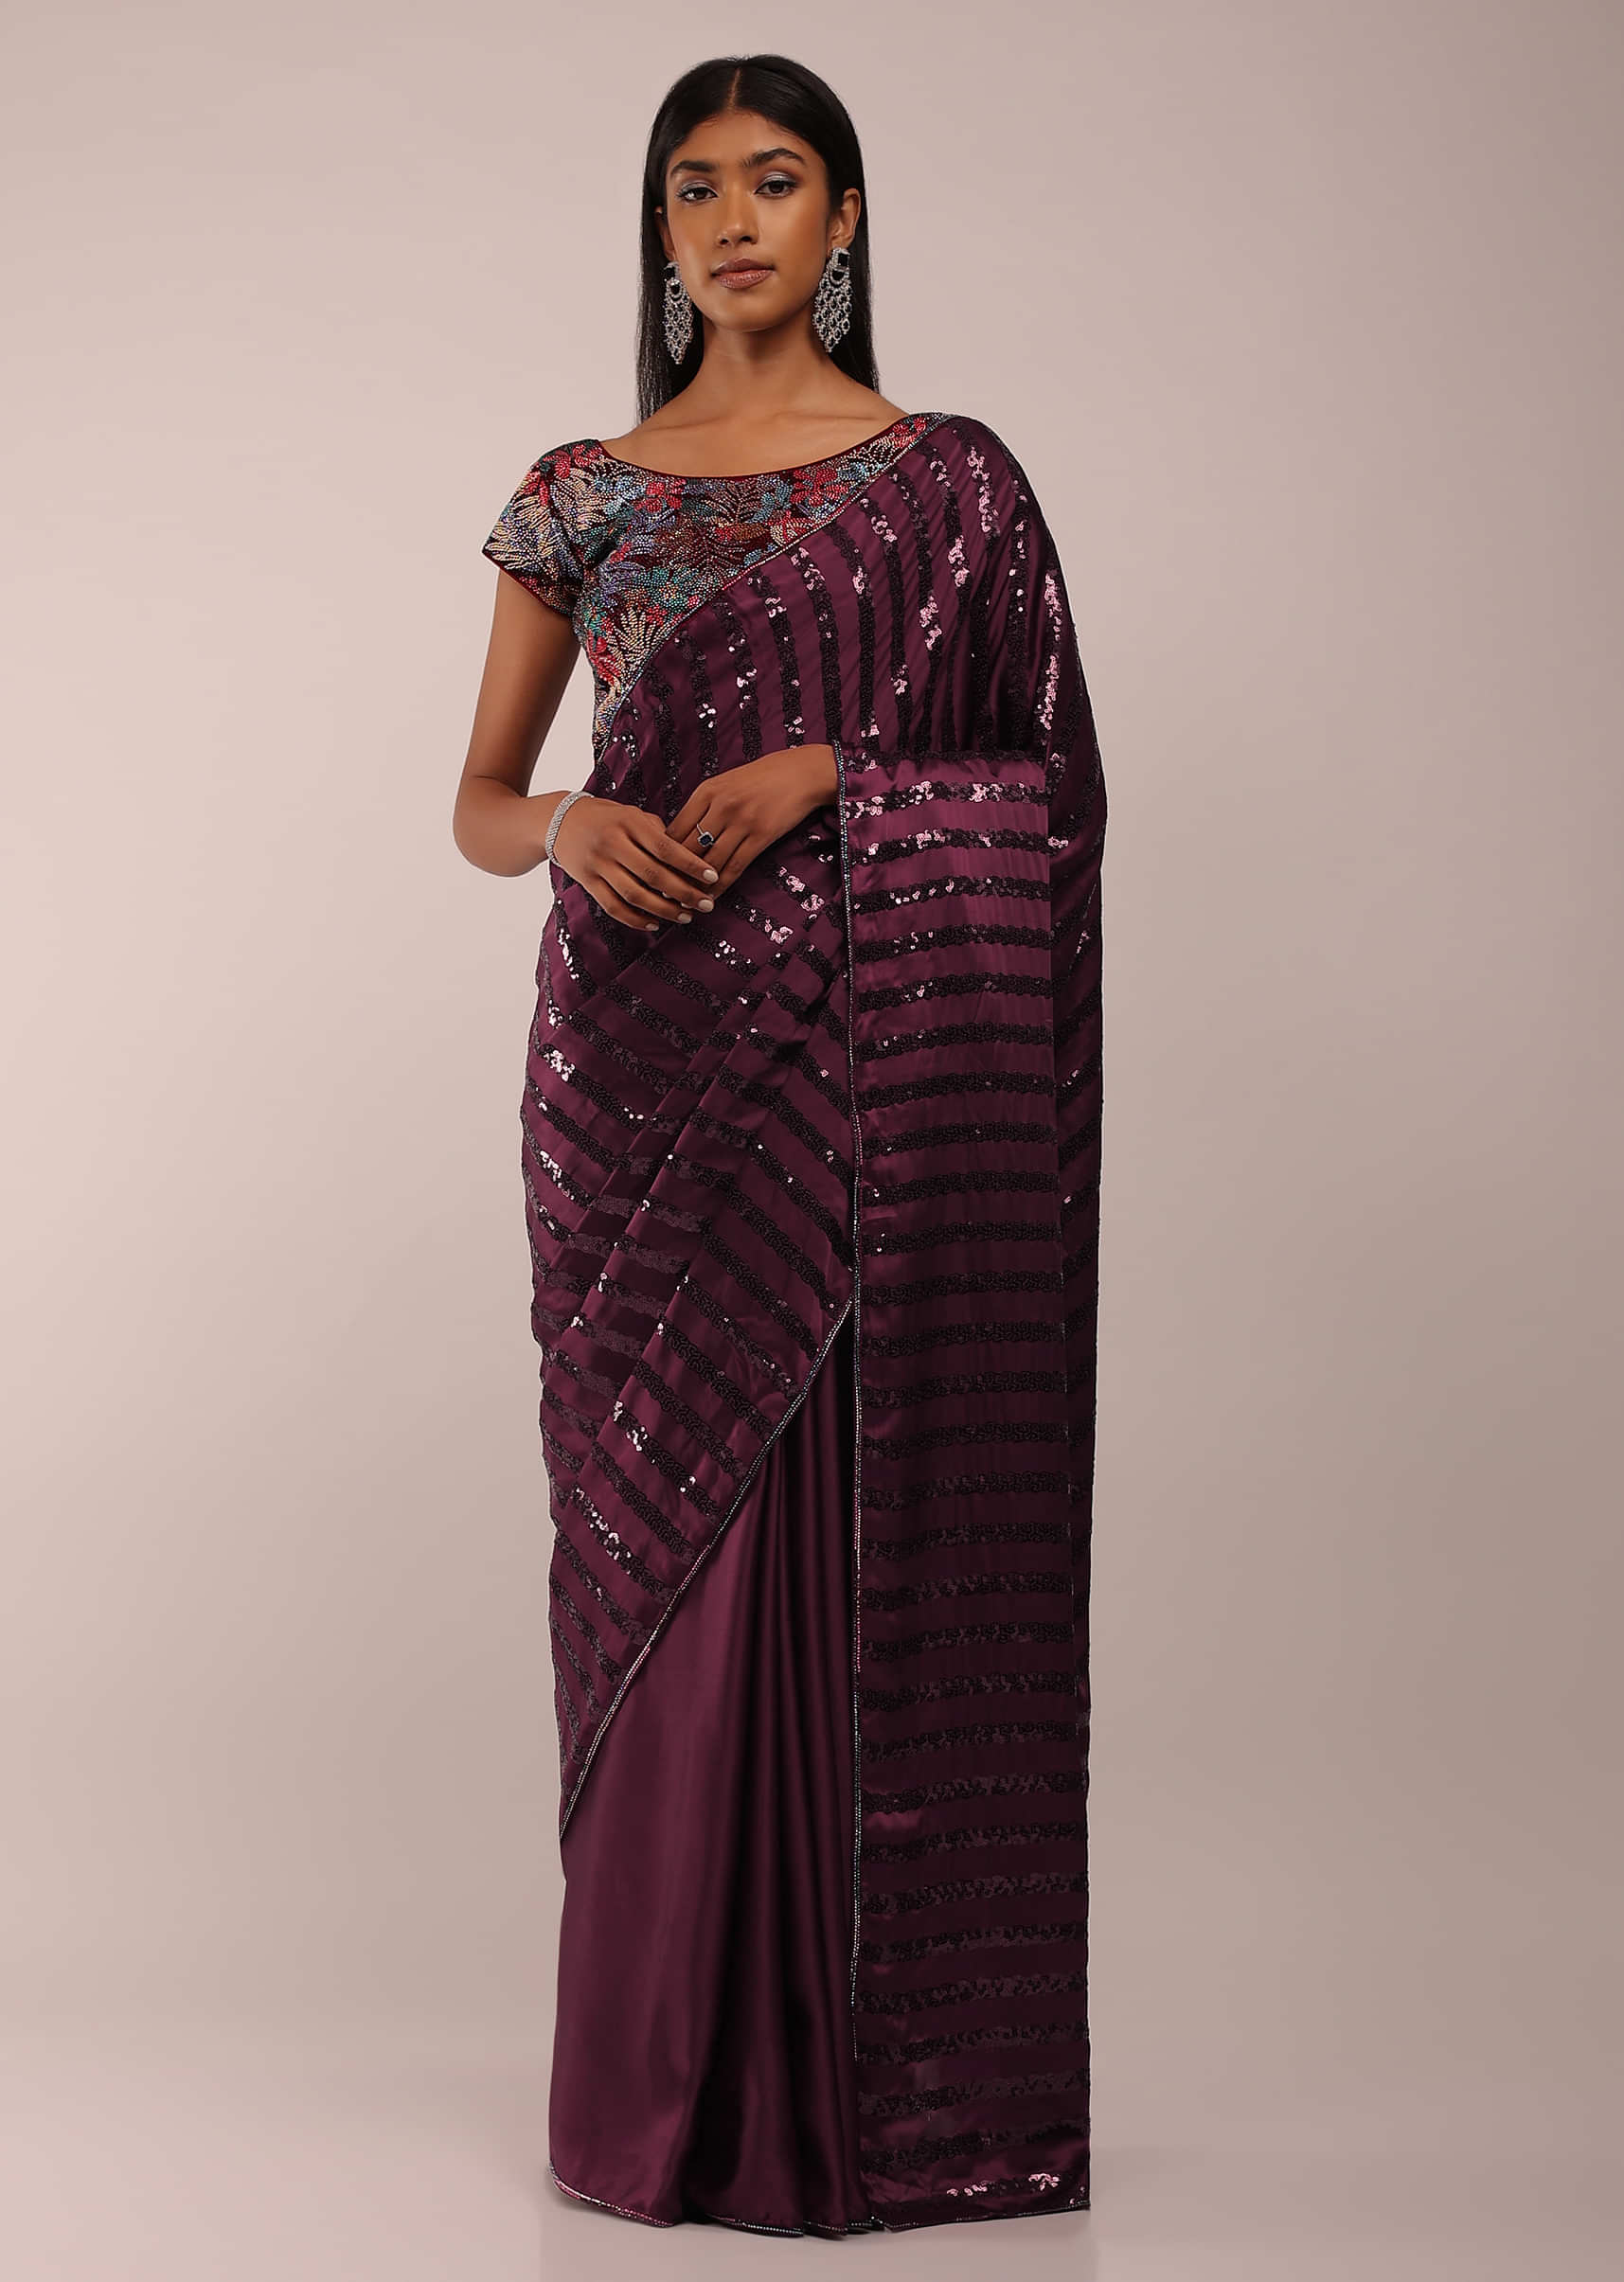 Silk Saree with blouse in Wine colour 1008-sgquangbinhtourist.com.vn